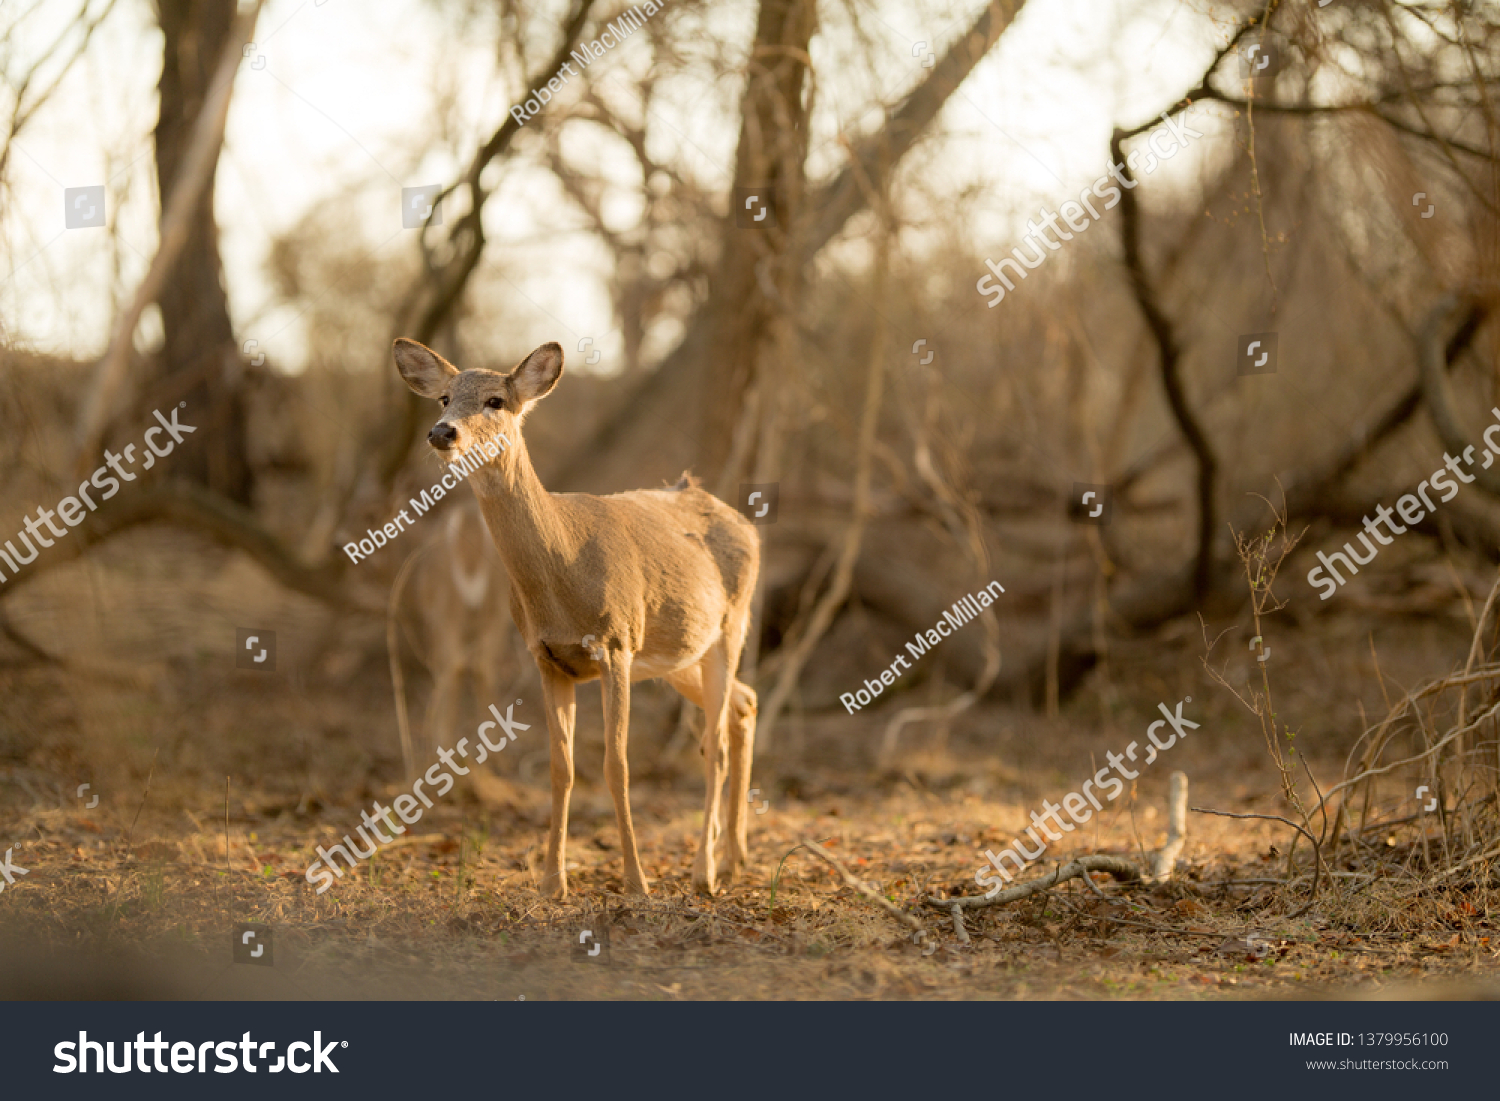 Young Whitetail Deer standing in the woods during sunrise.   The Deer were spotted in Playwicki Farms, located in Bucks County, Pennsylvania. #1379956100